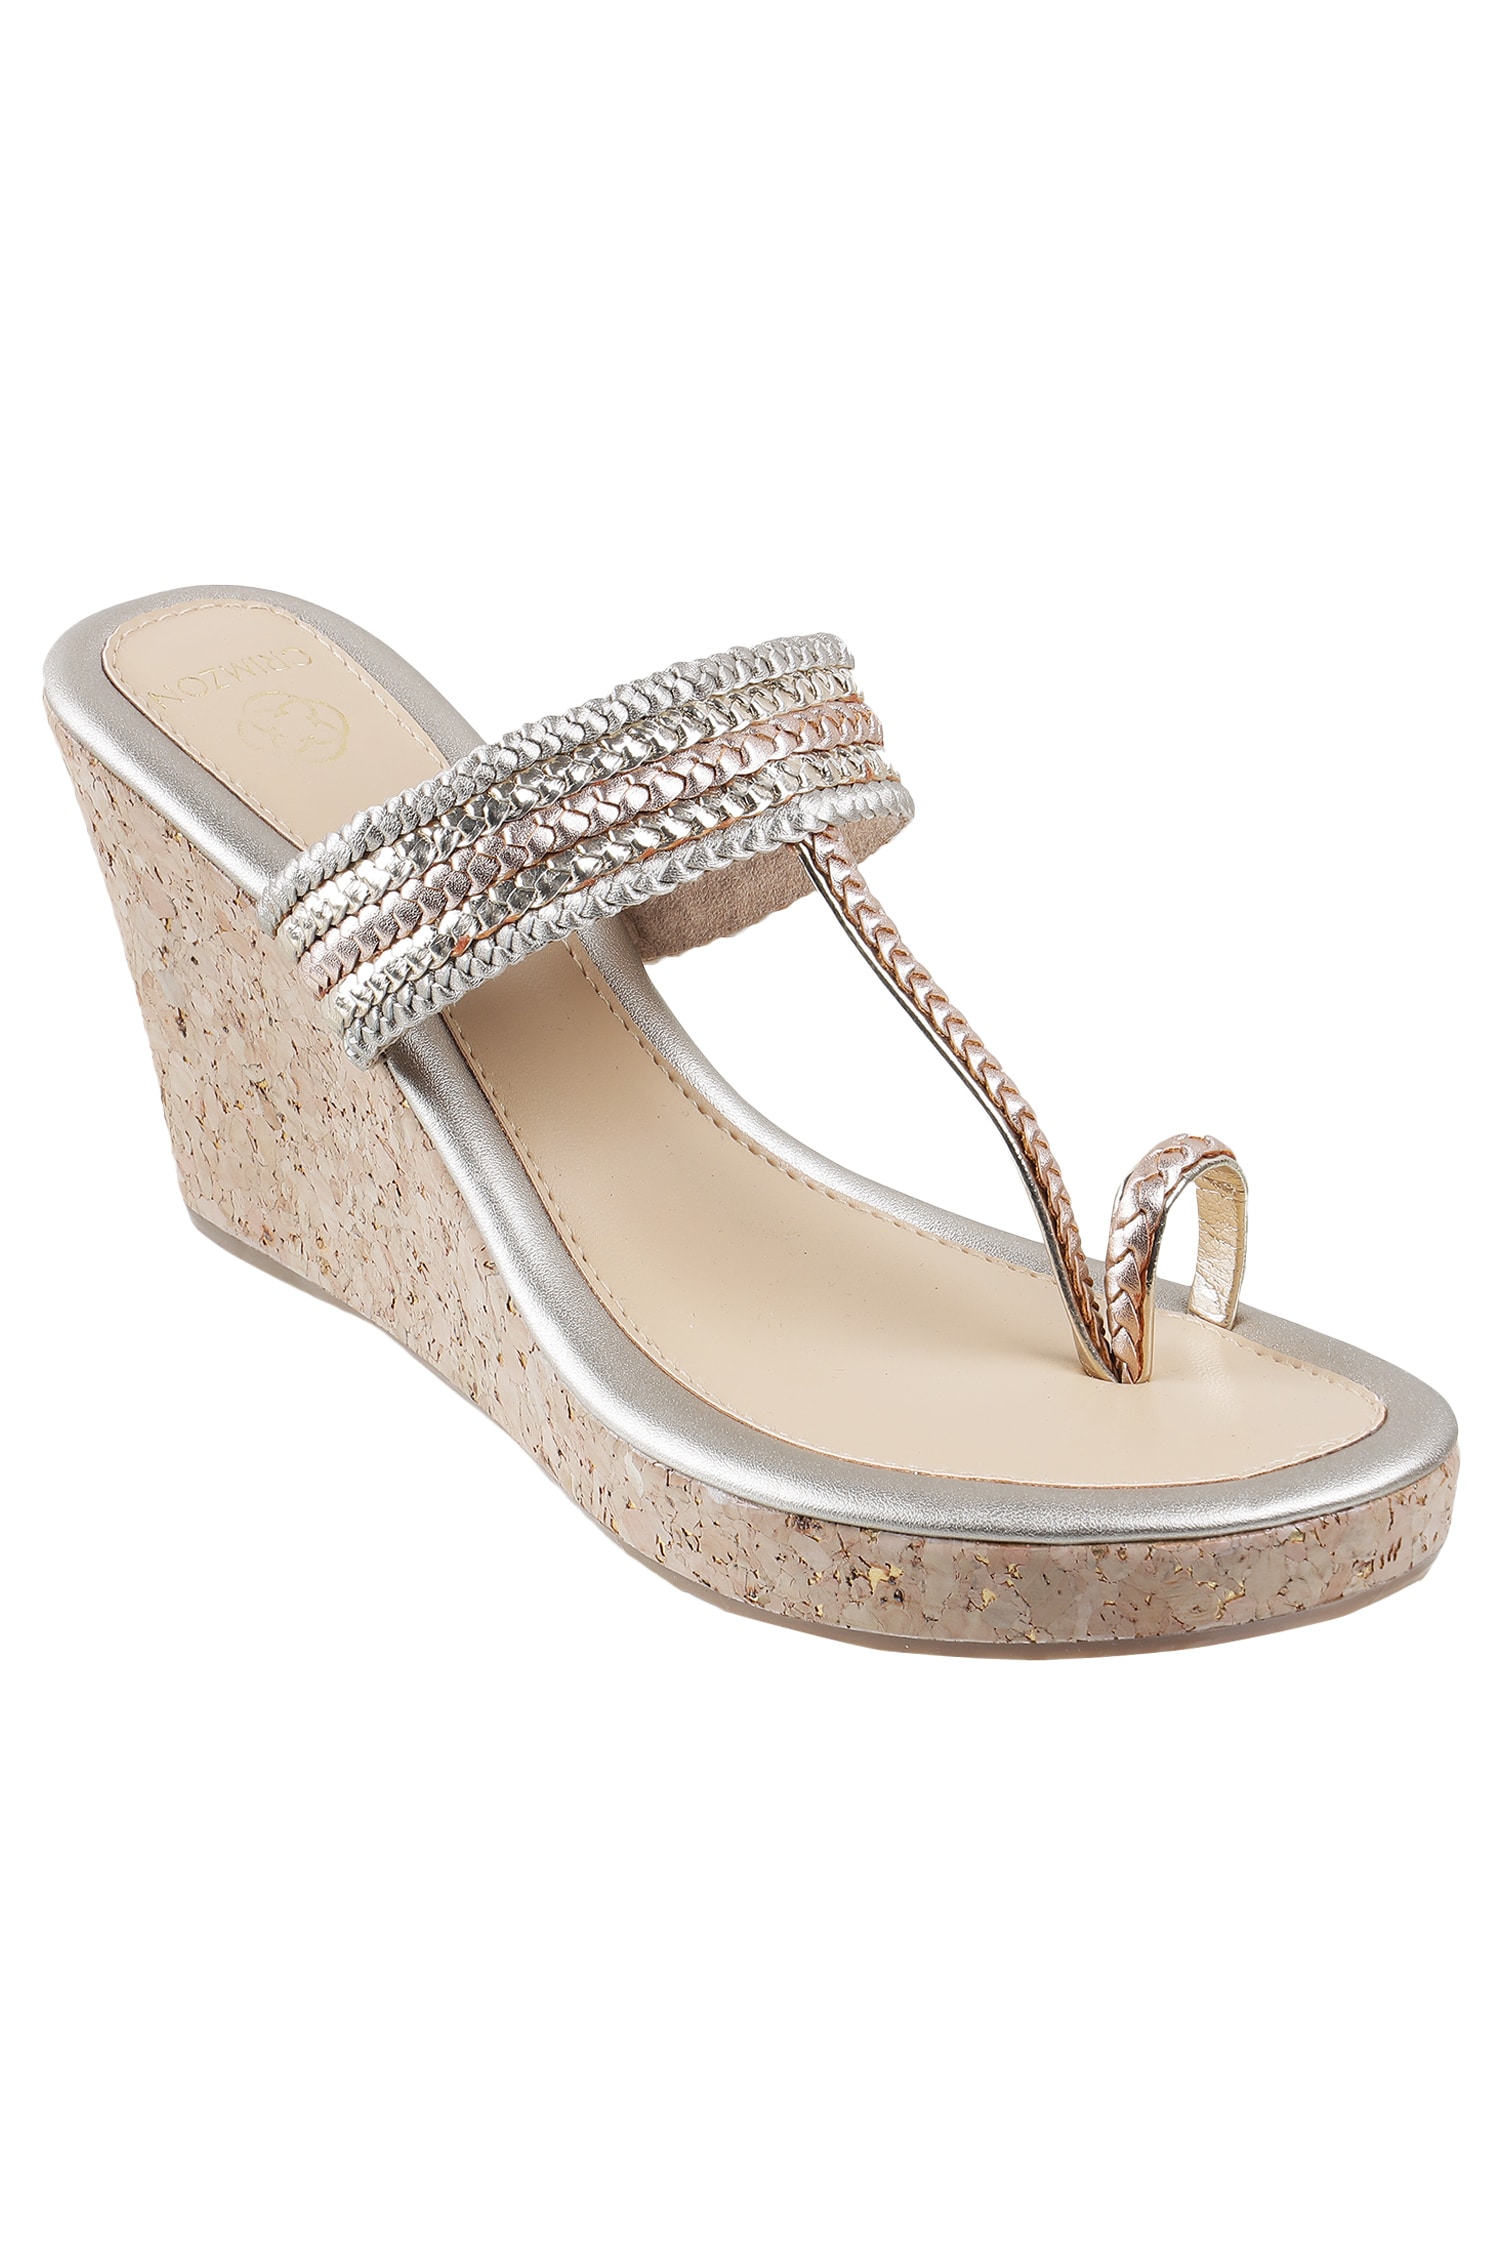 Buy Silver Kolhapuri Braided Wedges by Crimzon Online at Aza Fashions.